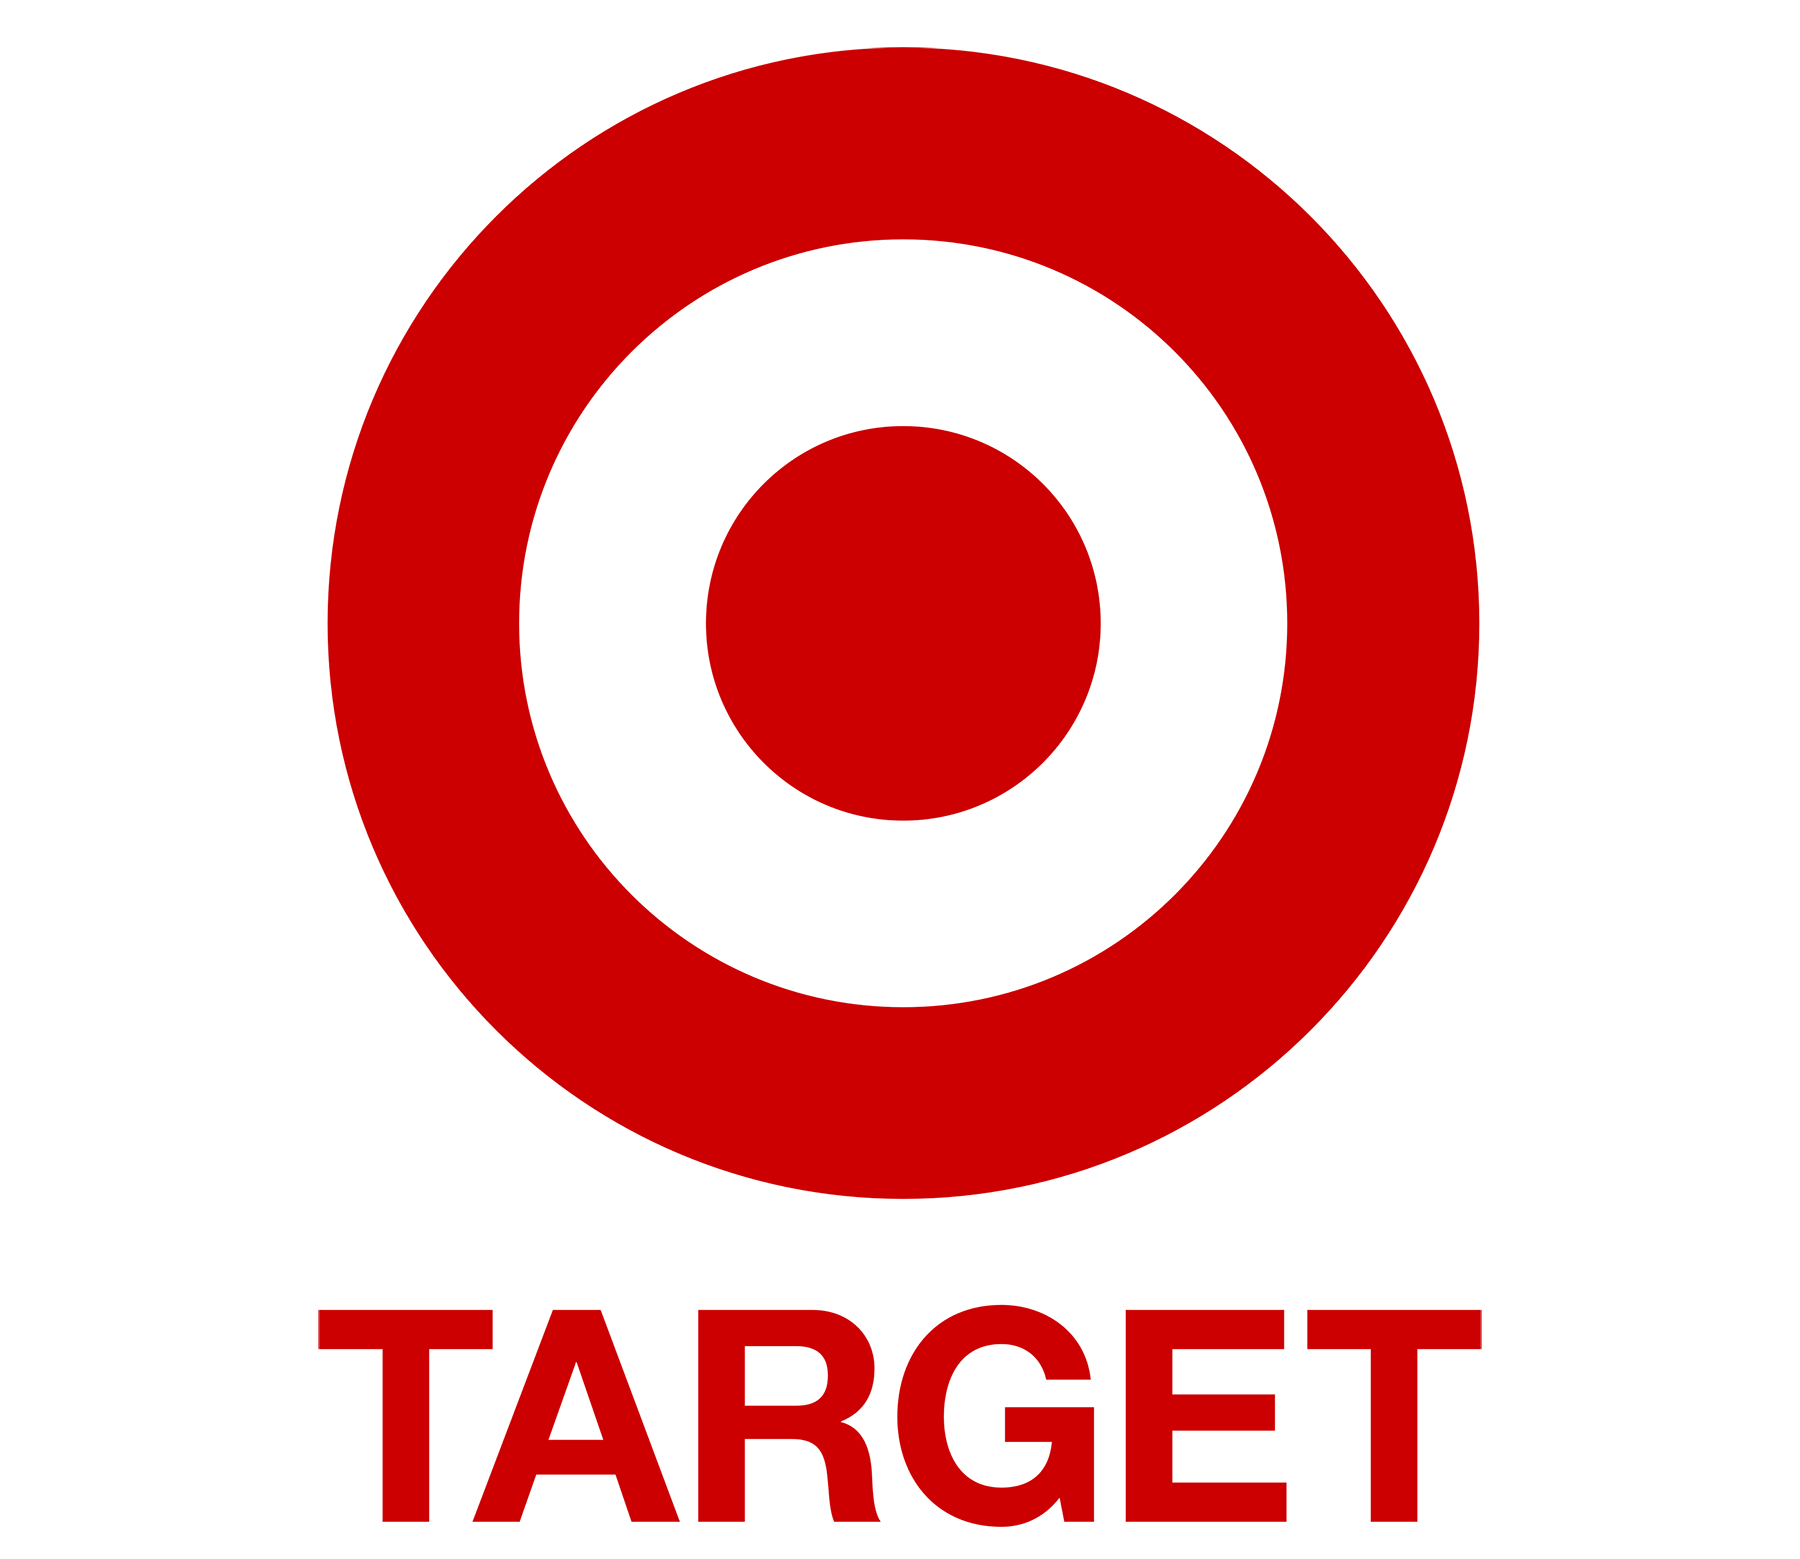 Metaphor Logo - Meaning Target logo and symbol. history and evolution